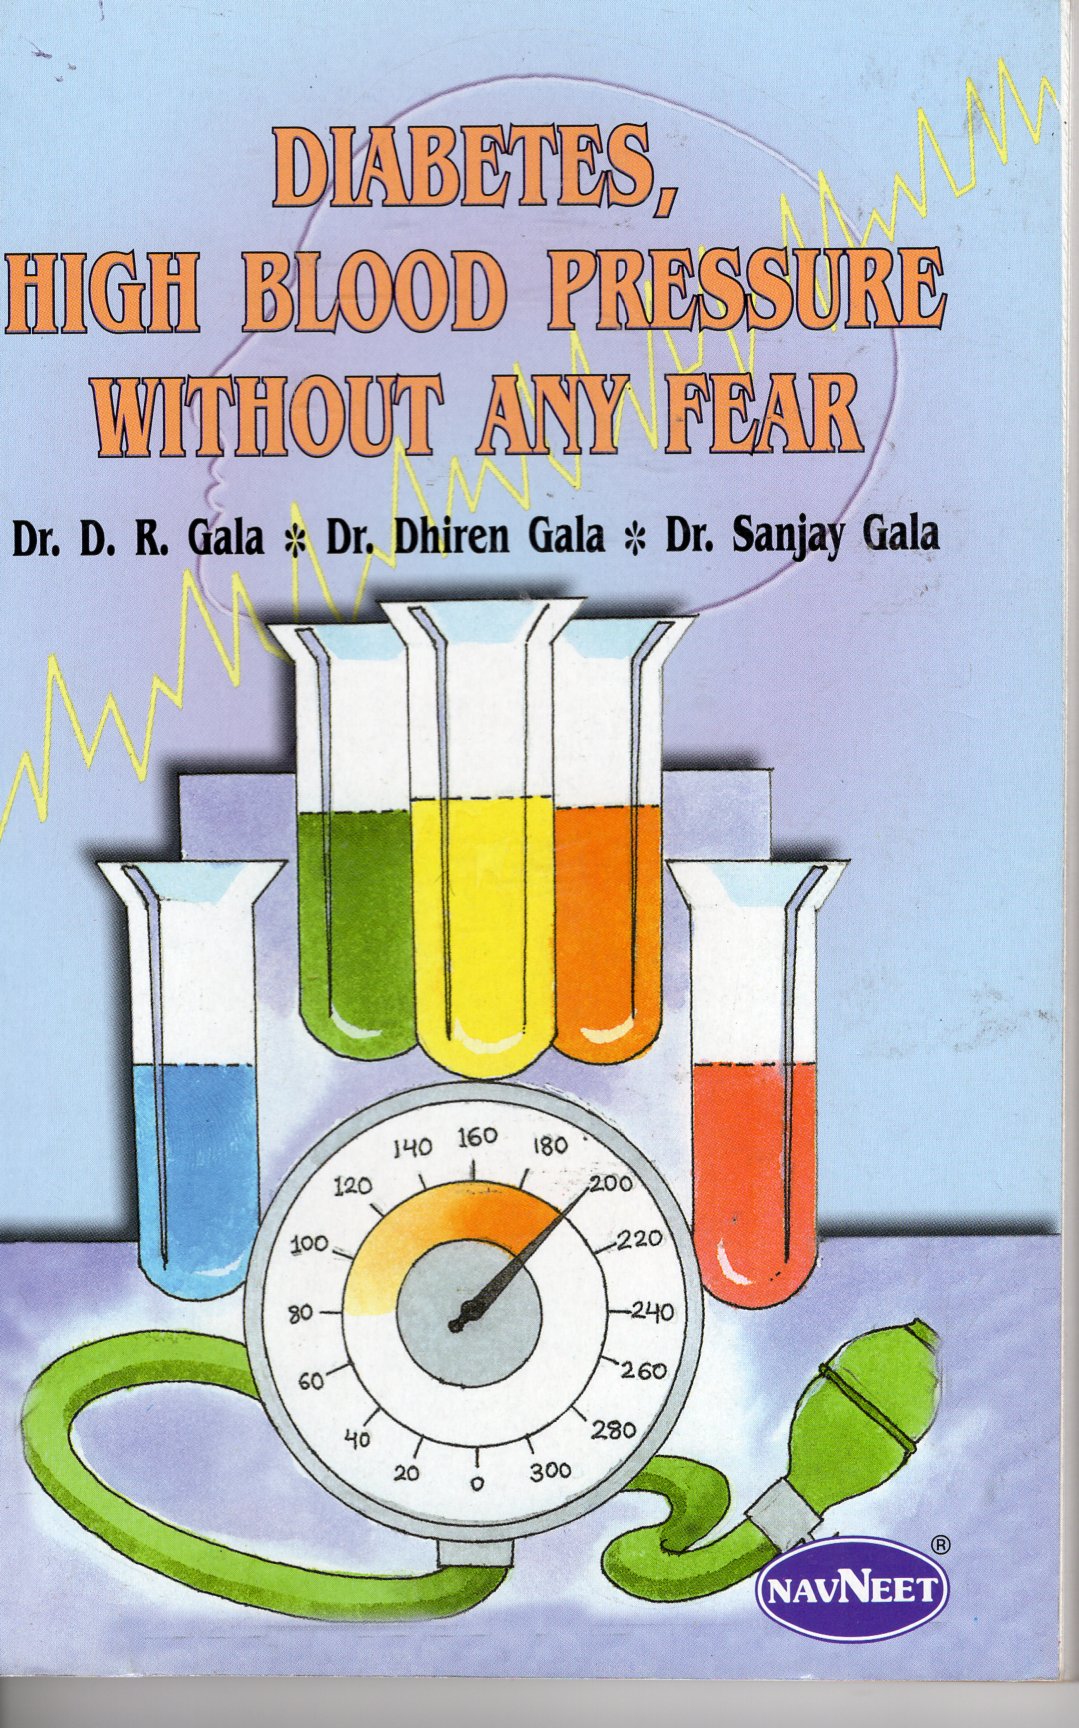 Diabetes, High Blood Pressure Without Any Fear